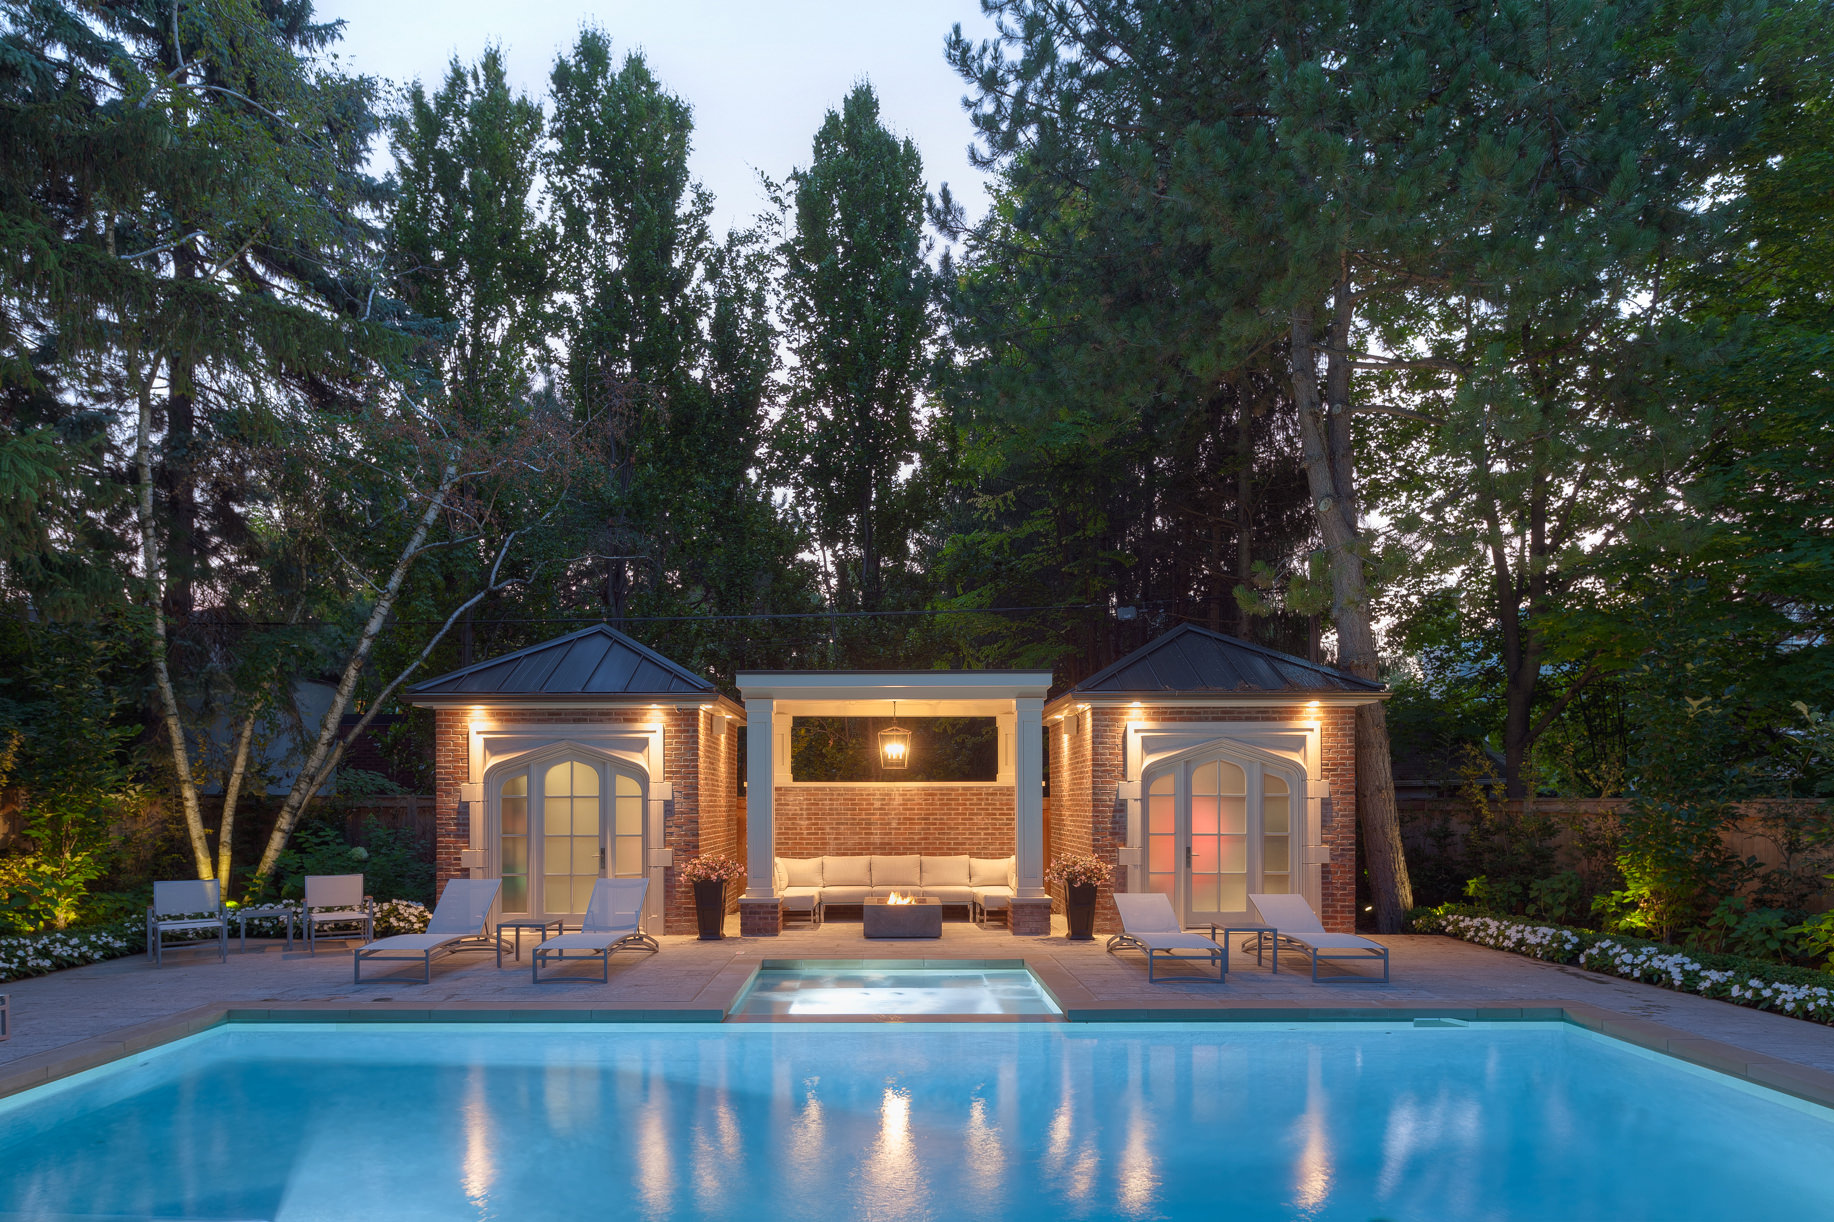 This outdoor space features a large pool and a hot tub. There are two pool houses connected by an outdoor sitting area with a long couch and a firepit.